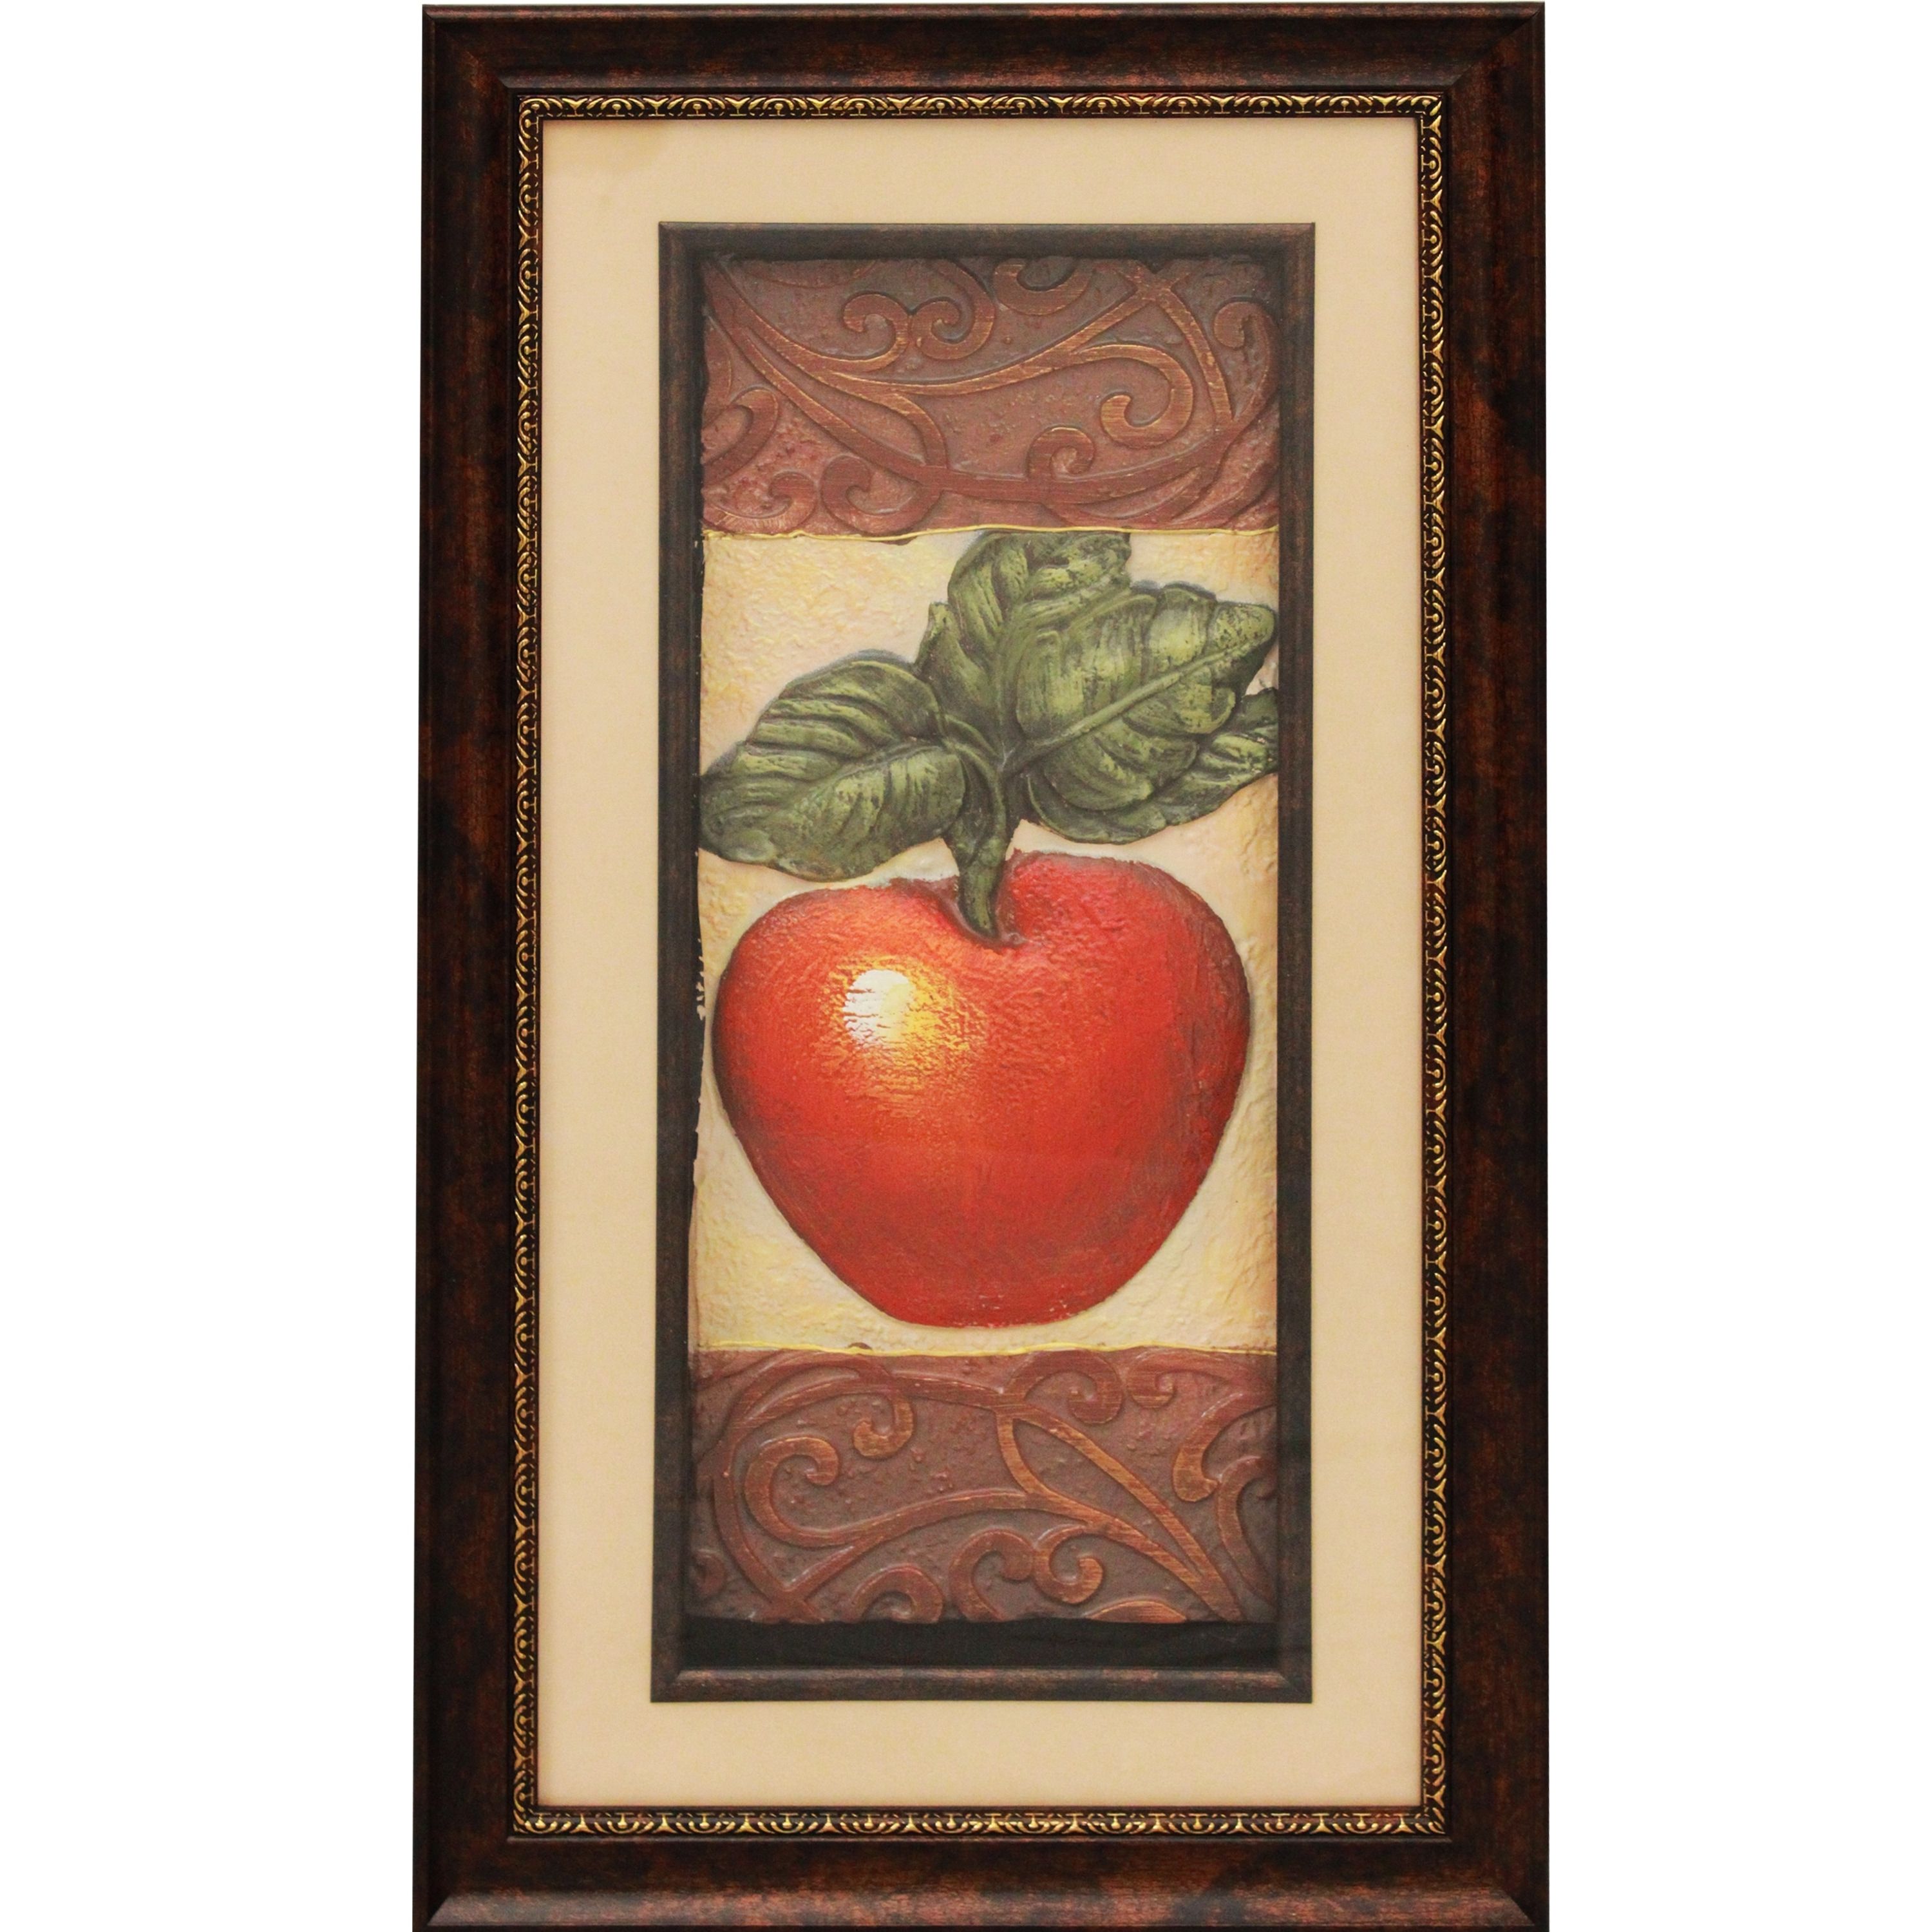 Fruit' 3d Framed Metal Art Prints (set Of 2) – Free Shipping Today In Famous Framed 3d Wall Art (View 13 of 15)